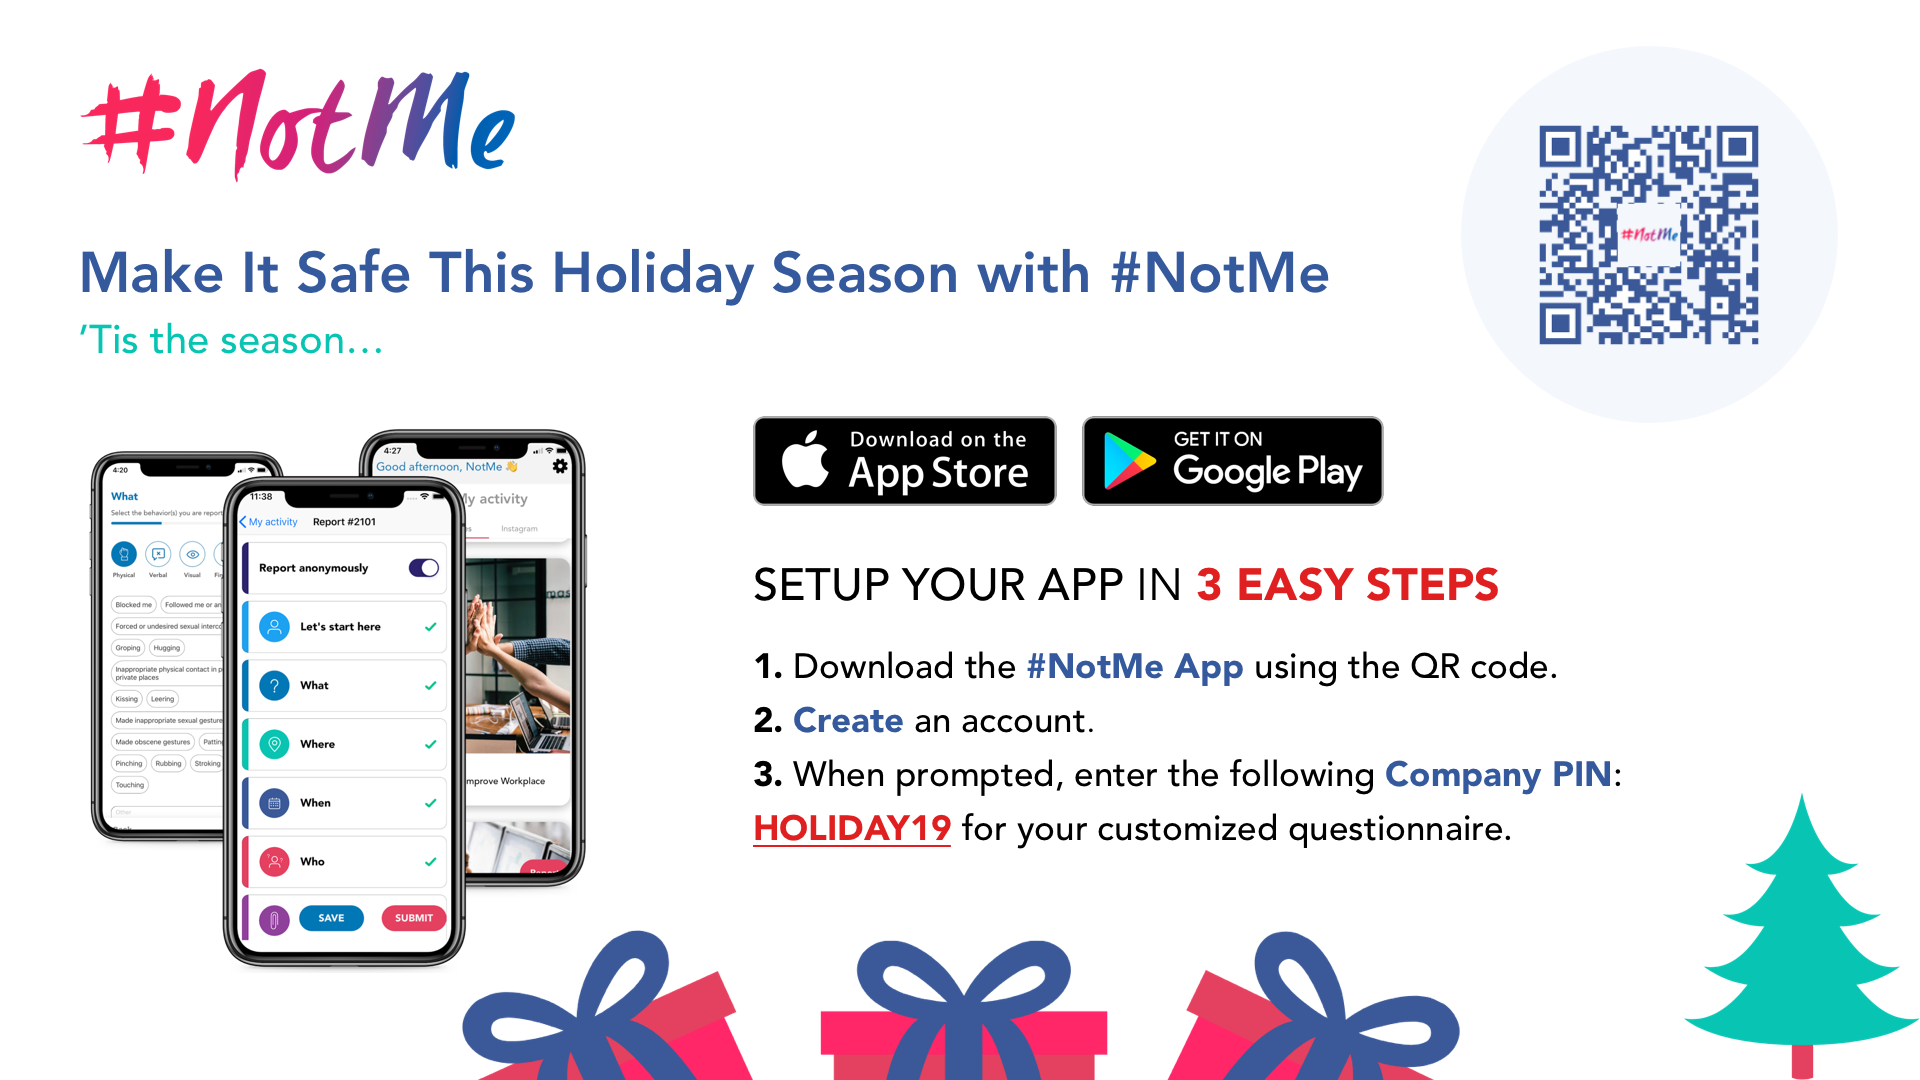 Download the #NotMe holiday app.